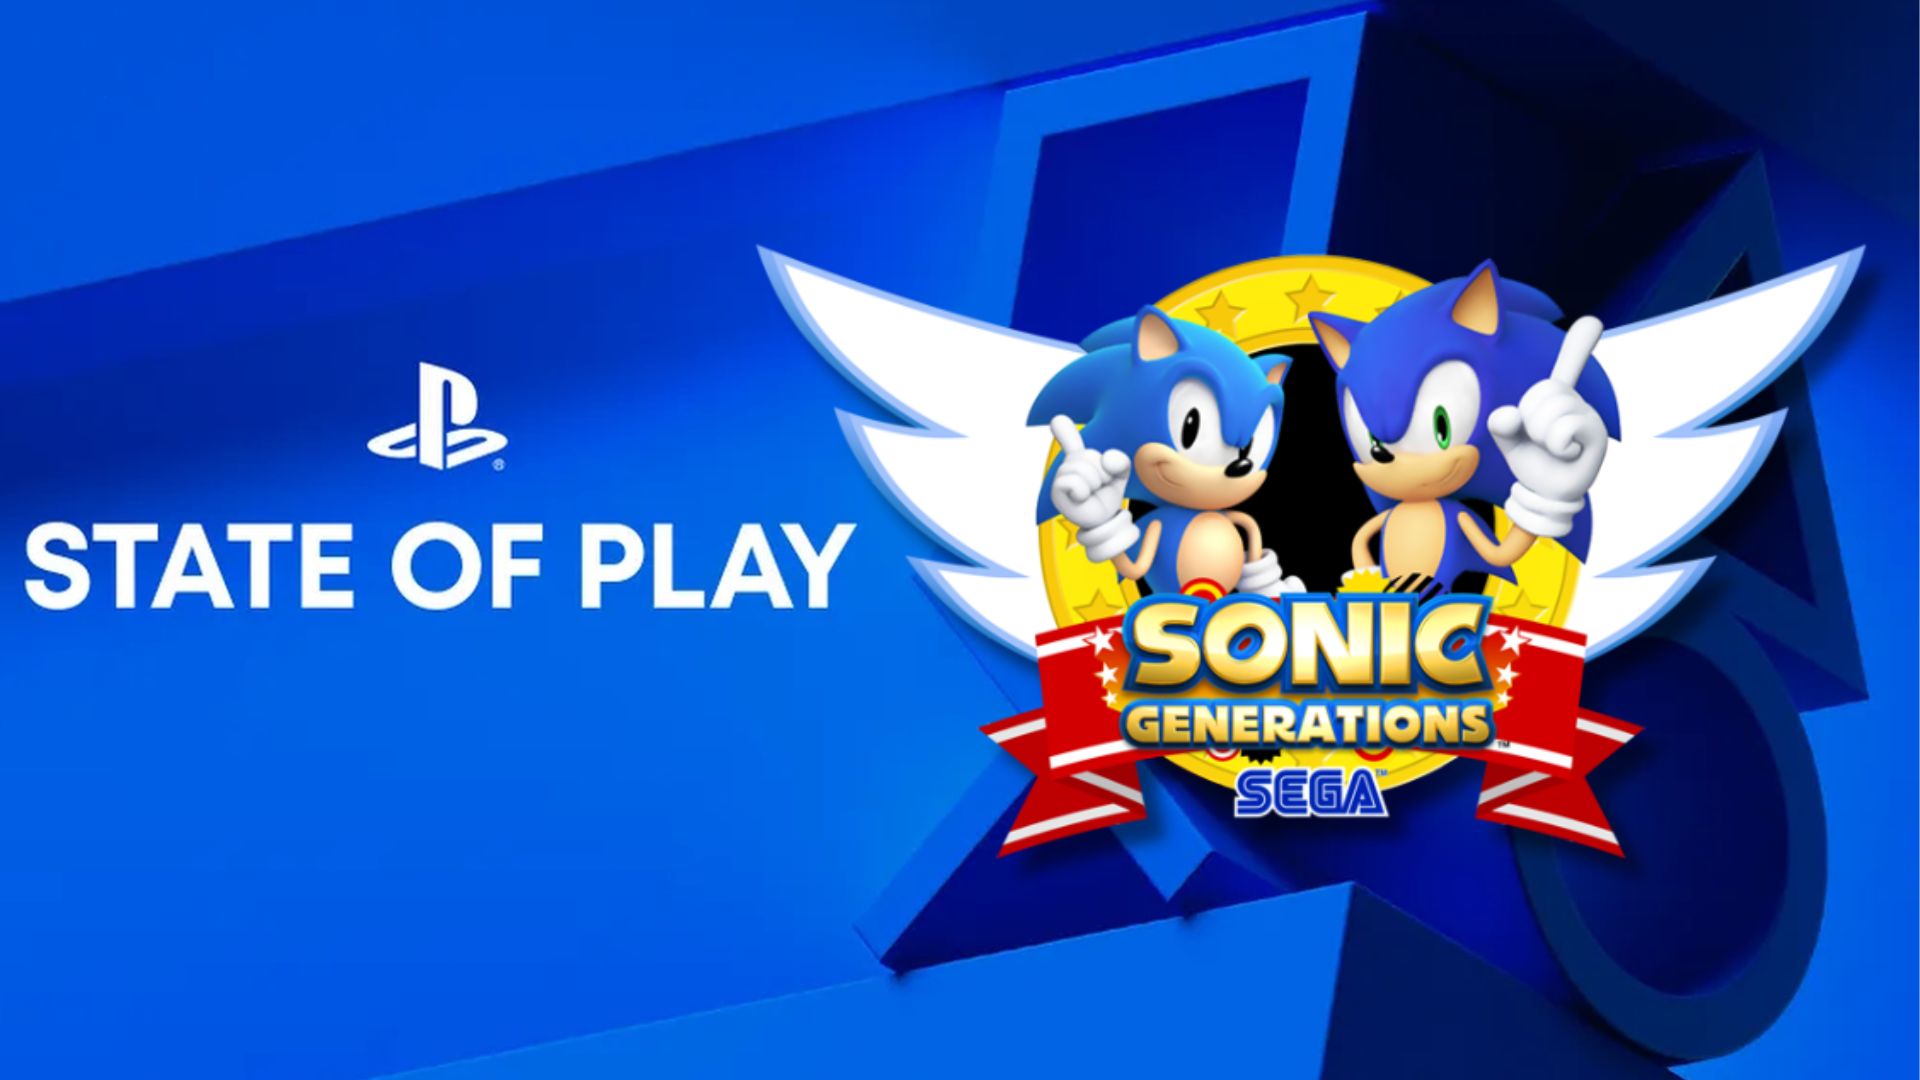 Is A Sonic Generations Remaster Announcement Imminent?